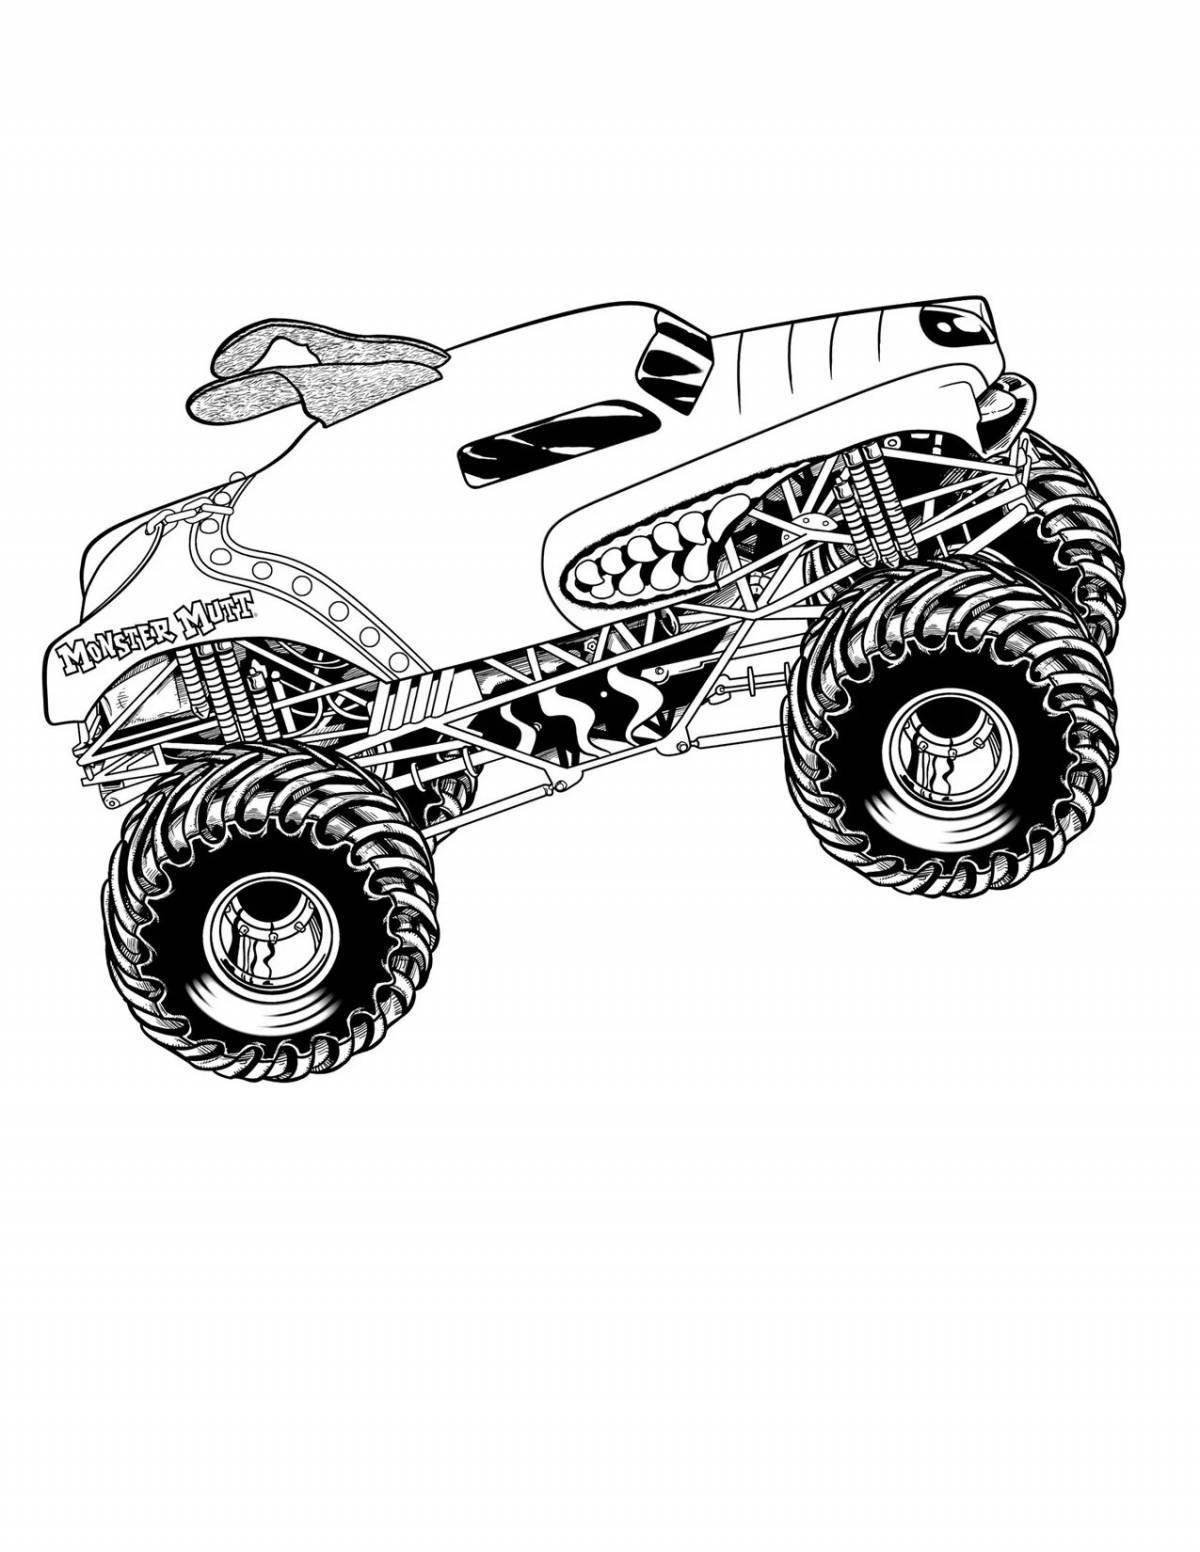 Adorable hot wheels monster truck coloring page